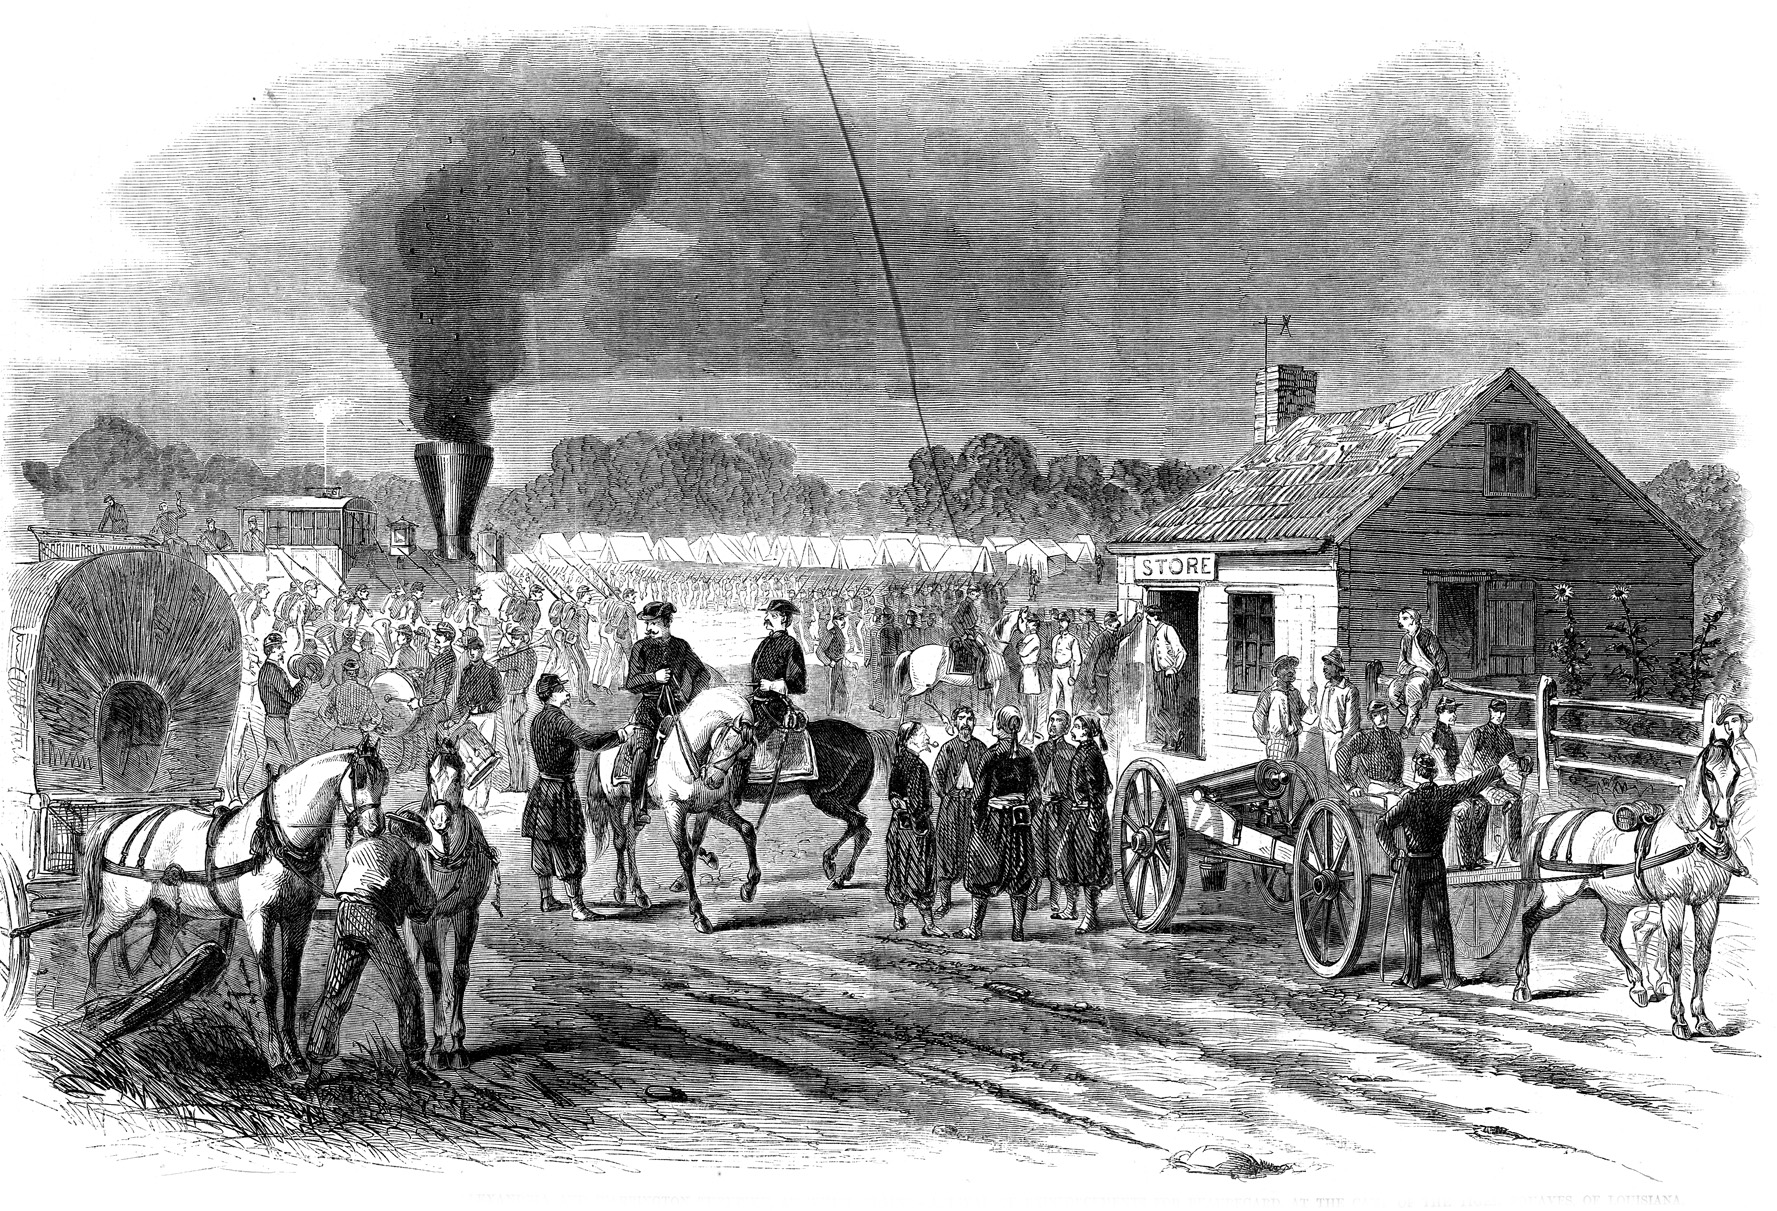 Soldiers of the Confederate Army of the Shenandoah detrain at Manassas Junction to reinforce Brig. Gen. P.G.T. Beauregard’s Confederate Army of the Potomac defending the Bull Run line. 